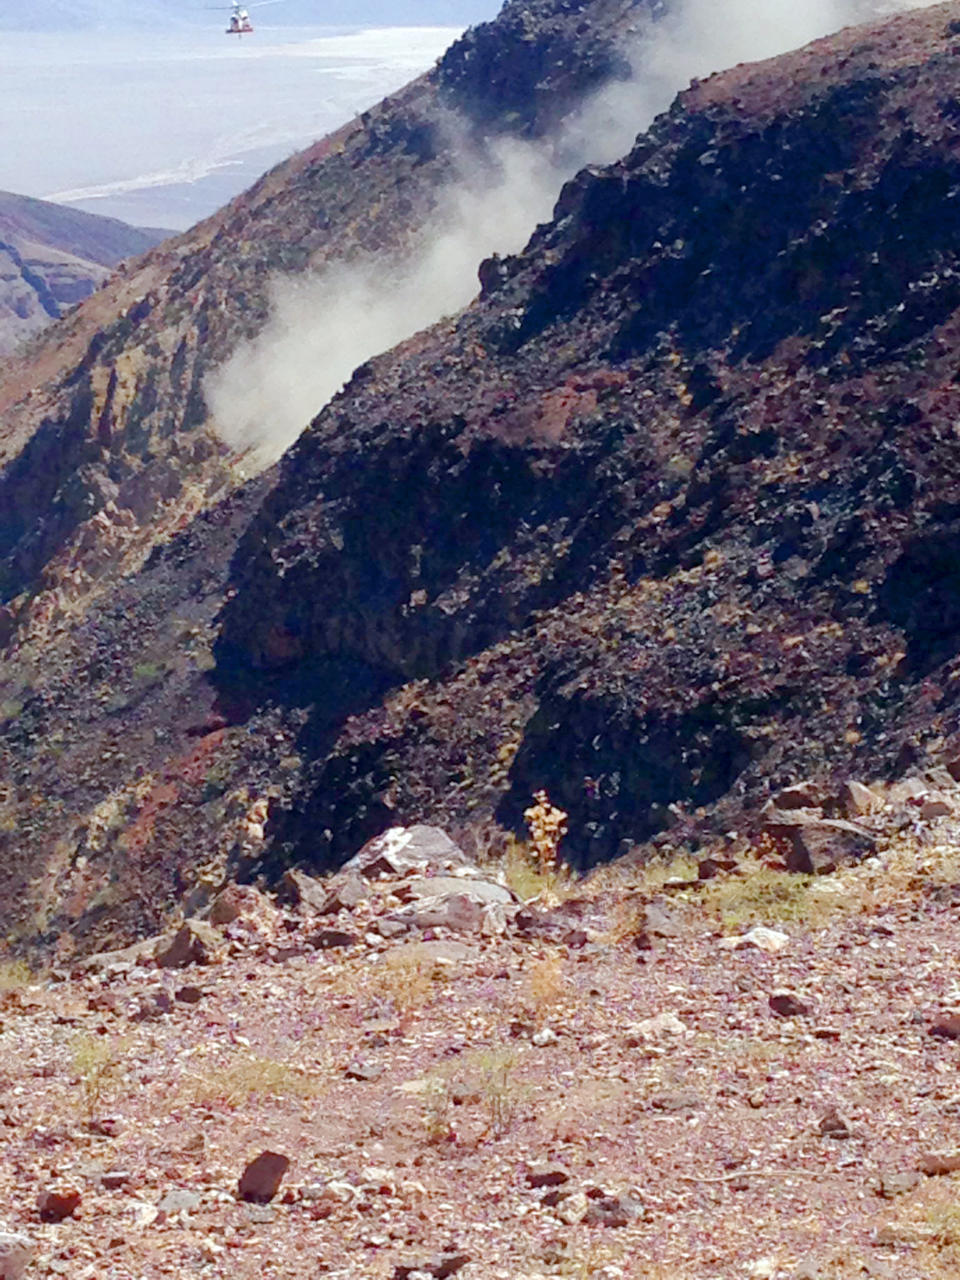 This photo provided by Panamint Springs Resort shows where a Navy fighter jet crashed Wednesday, July 31, 2019, in Death Valley National Park, injuring several people who were at a scenic overlook where aviation enthusiasts routinely watch military pilots speeding low through a chasm dubbed Star Wars Canyon, officials said. The crash sent dark smoke billowing in the air, said Aaron Cassell, who was working at his family's Panamint Springs Resort about 10 miles (16 kilometers) away. (Aaron Cassell/Panamint Springs Resort via AP)